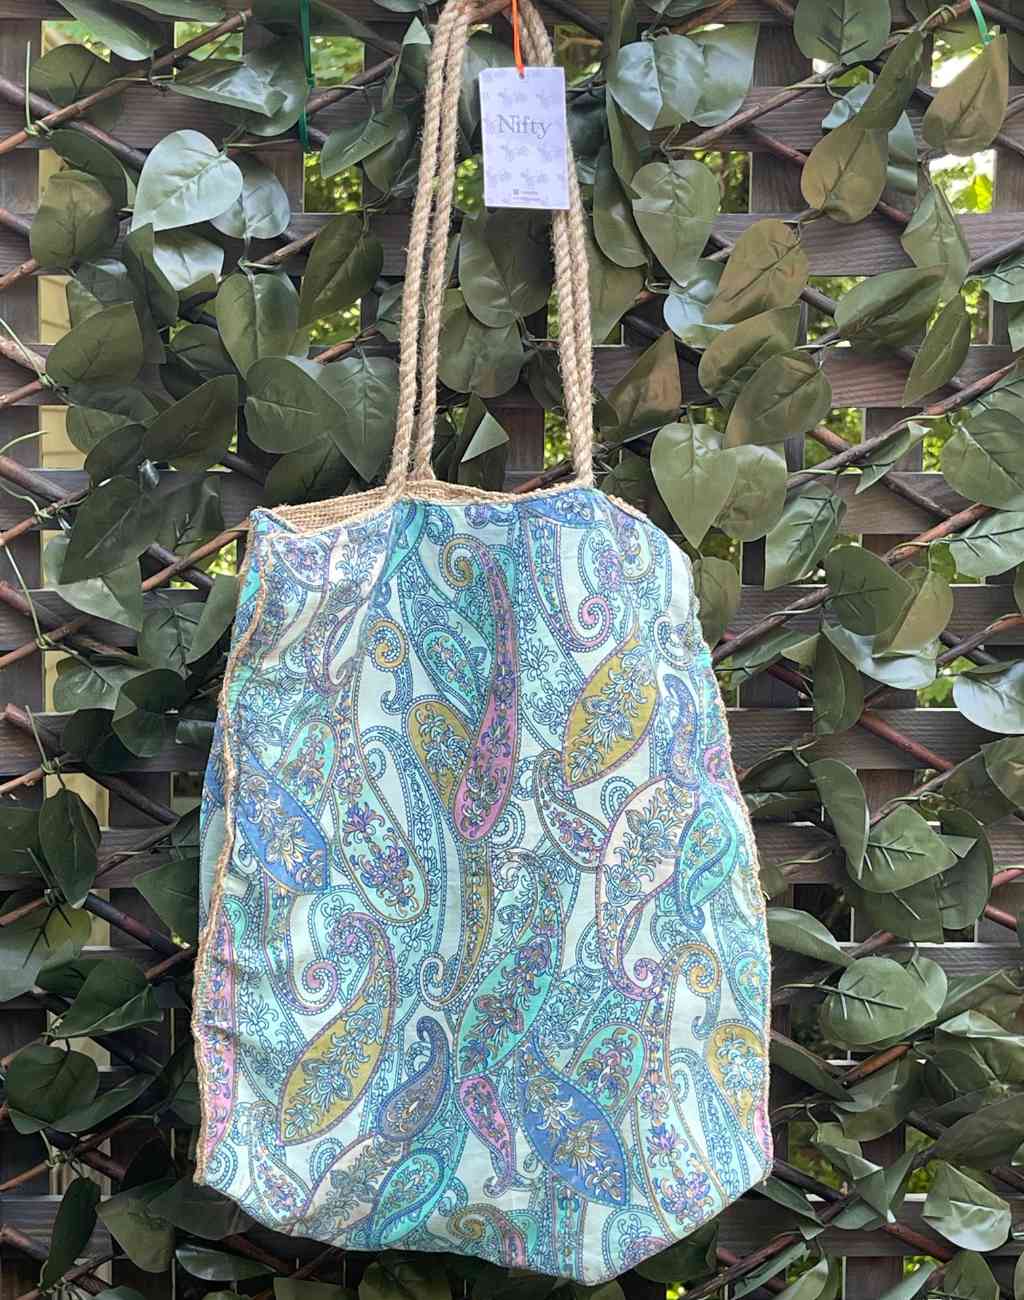 Vintage Silk Covered Jute Tote Bag in Turquoise Paisley Print - Visit Nifty Nifty 